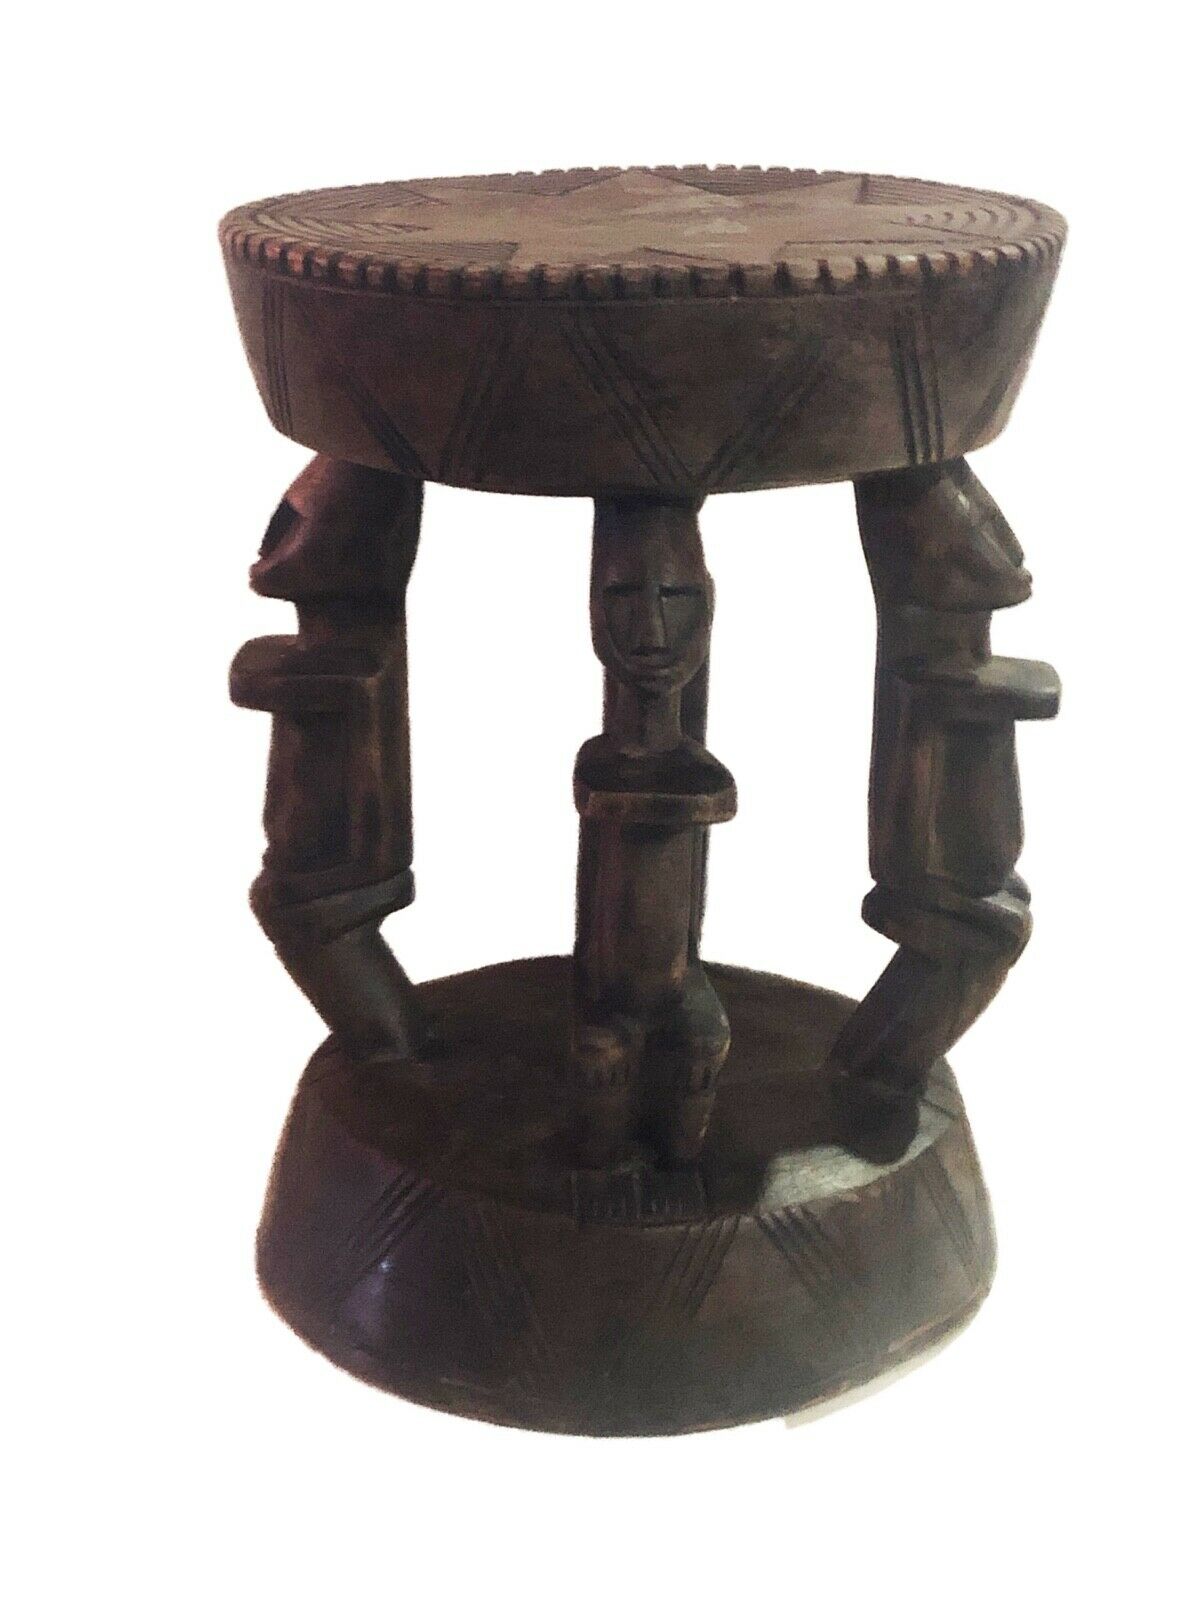 #652 African Dogon  Carved Wood Milk Stool Mali 12" H by 9.25" D